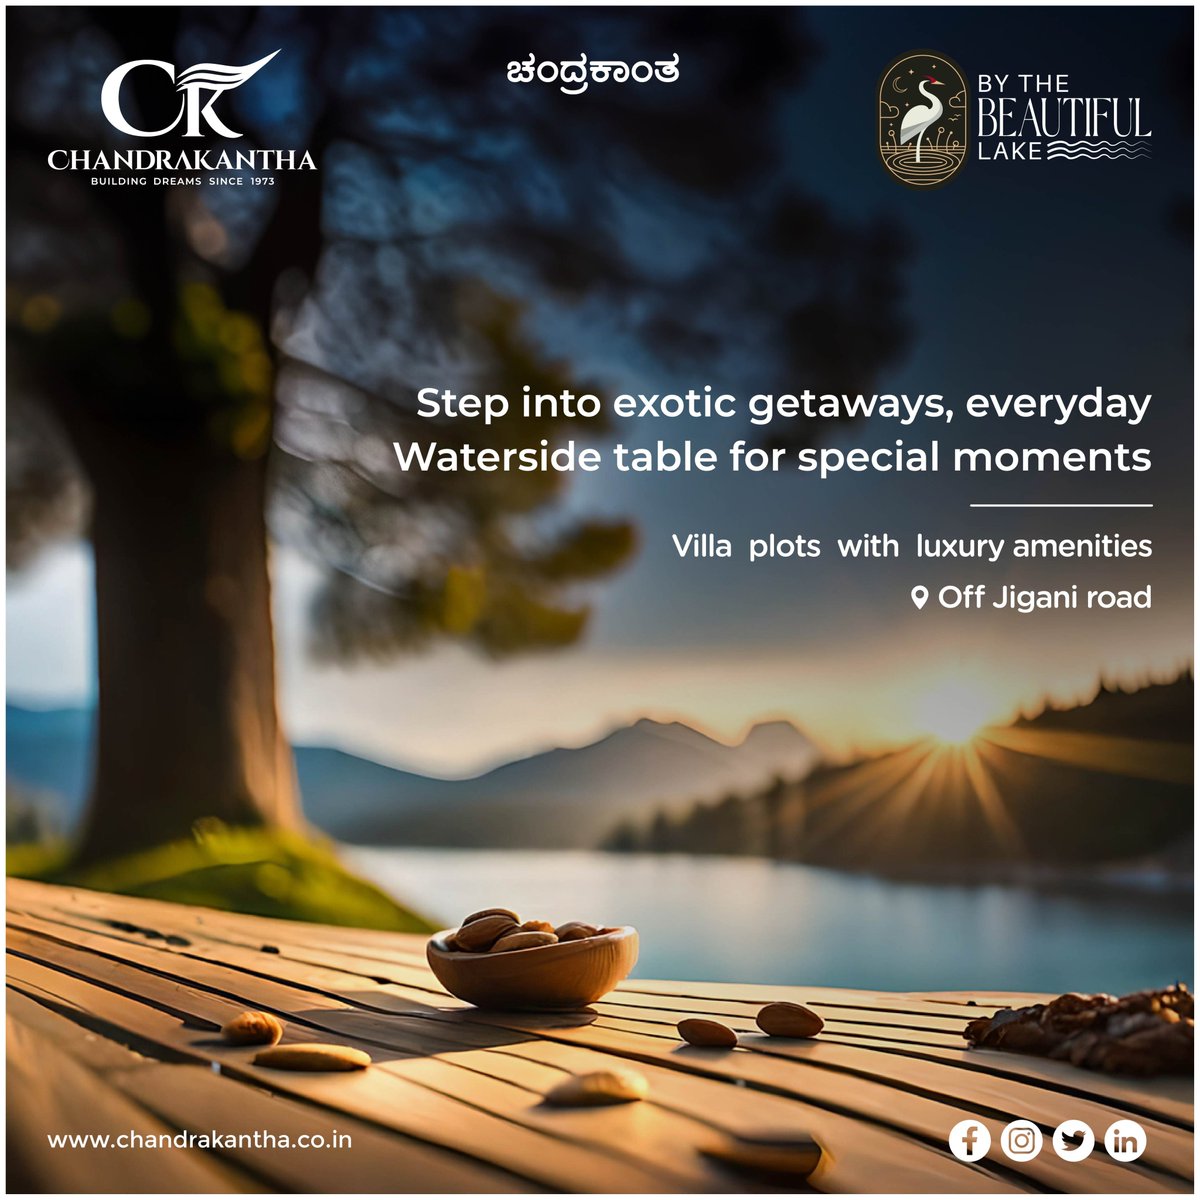 Don't just dream about it – make it a reality. Enquire now and step into the life you've always desired. Contact us for more details.
#ByTheBeautifulLake #Jigani #Anekal #ChandrakanthaDevelopers #2bhkvillas #3bhkvillas #lakefrontvillas #lakeview #lakefronthouse #luxuryhomes